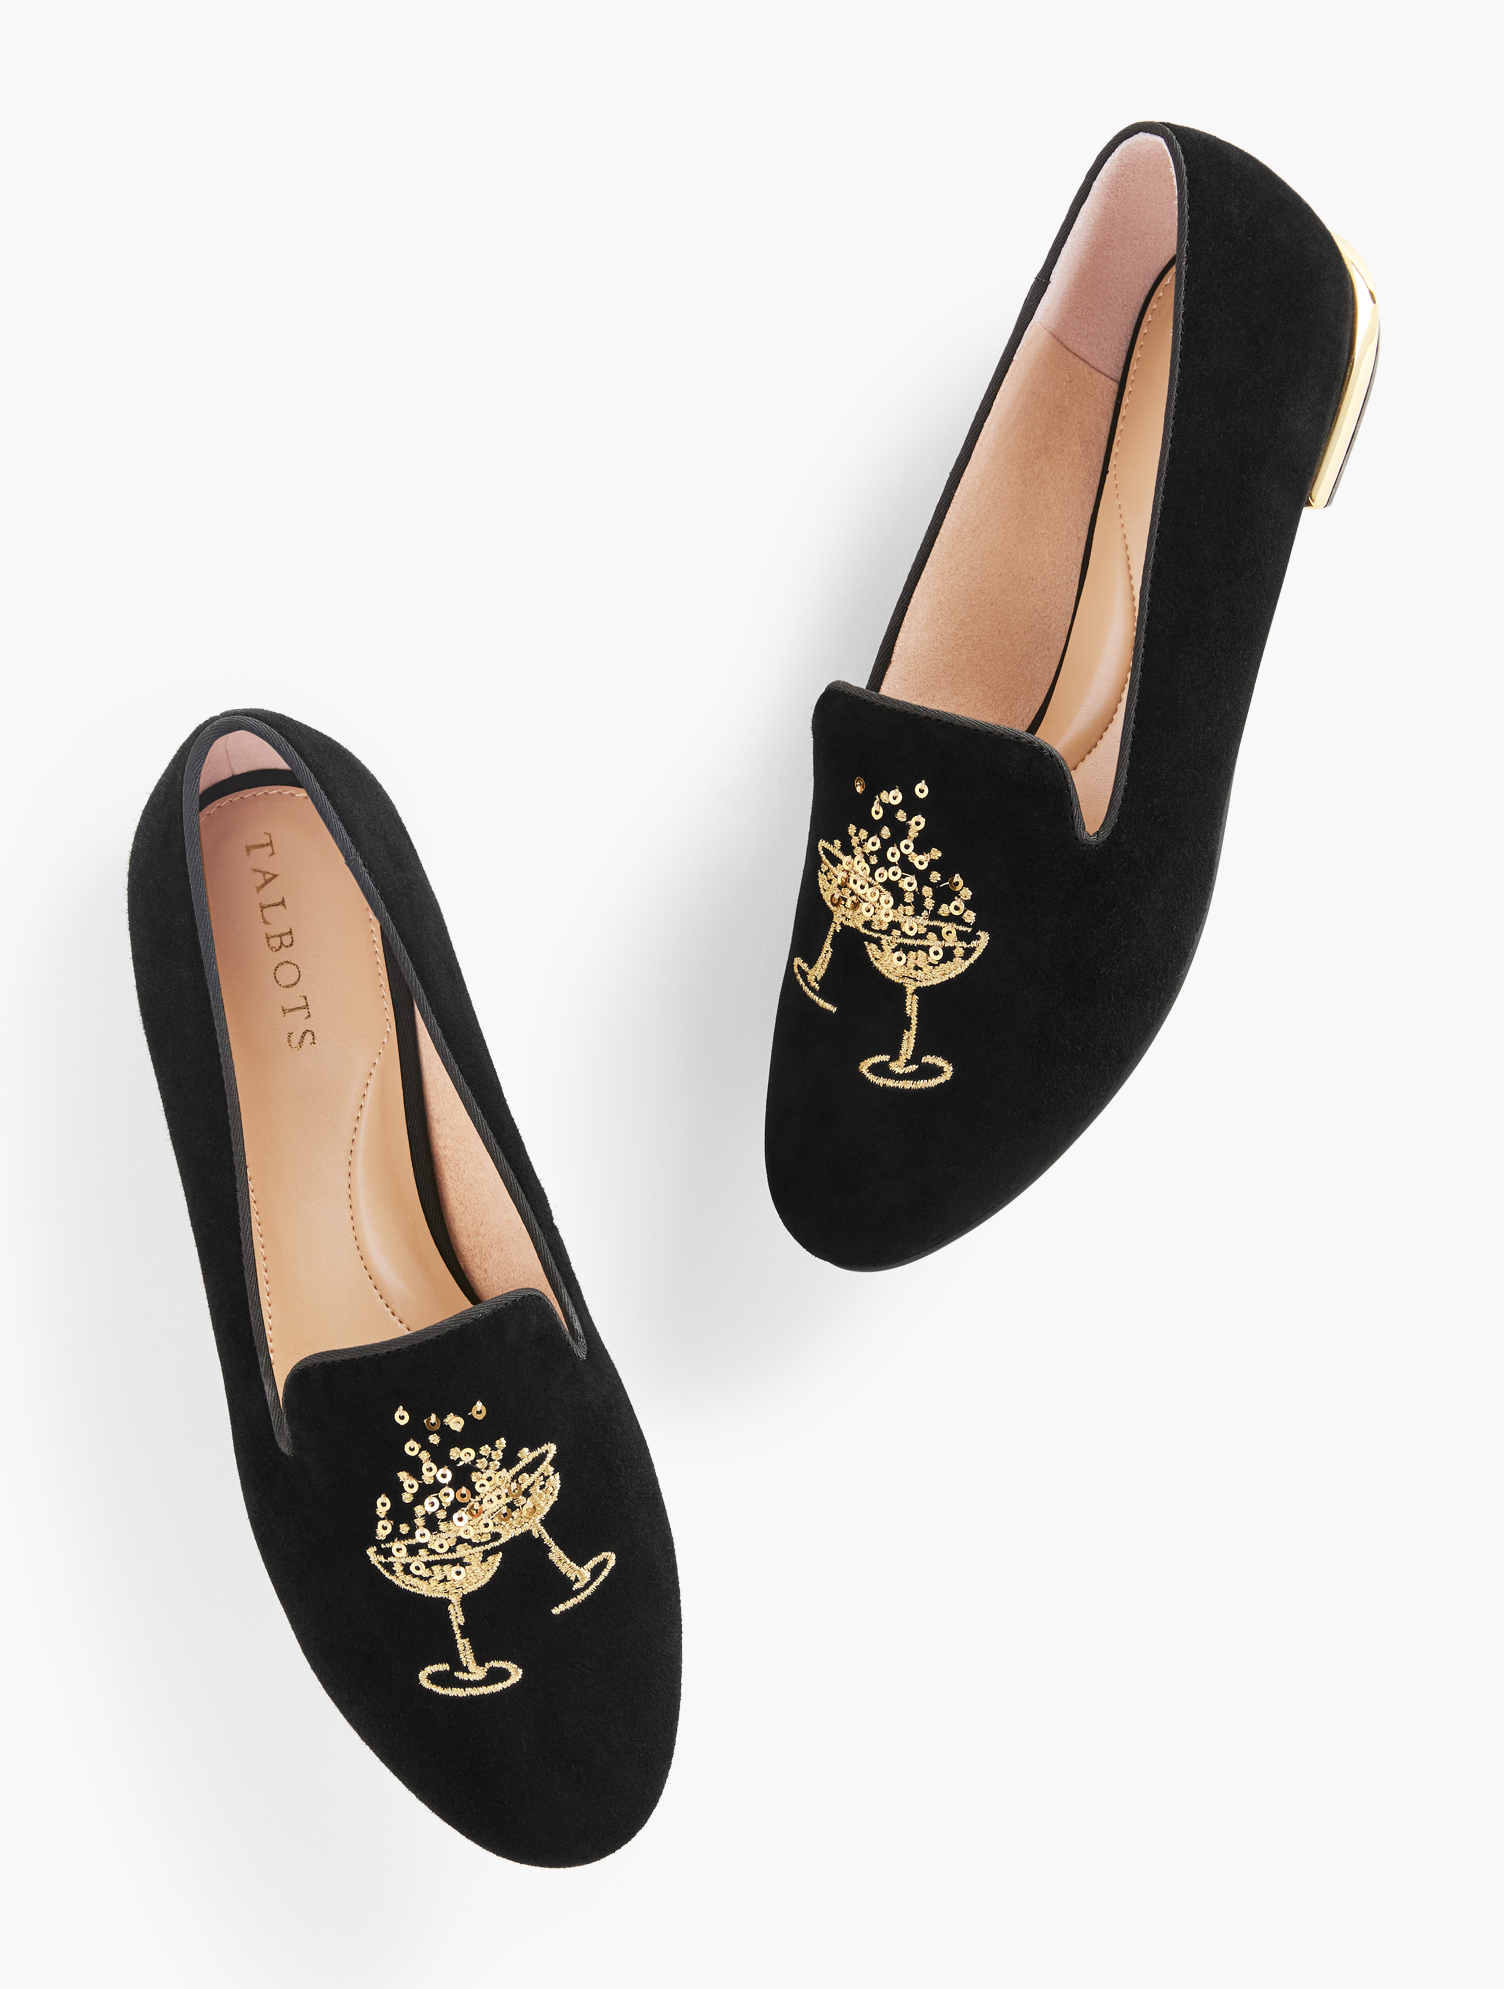 Talbots Ryan Embroidered Suede Loafers - Toasting Glass - Black - 8m